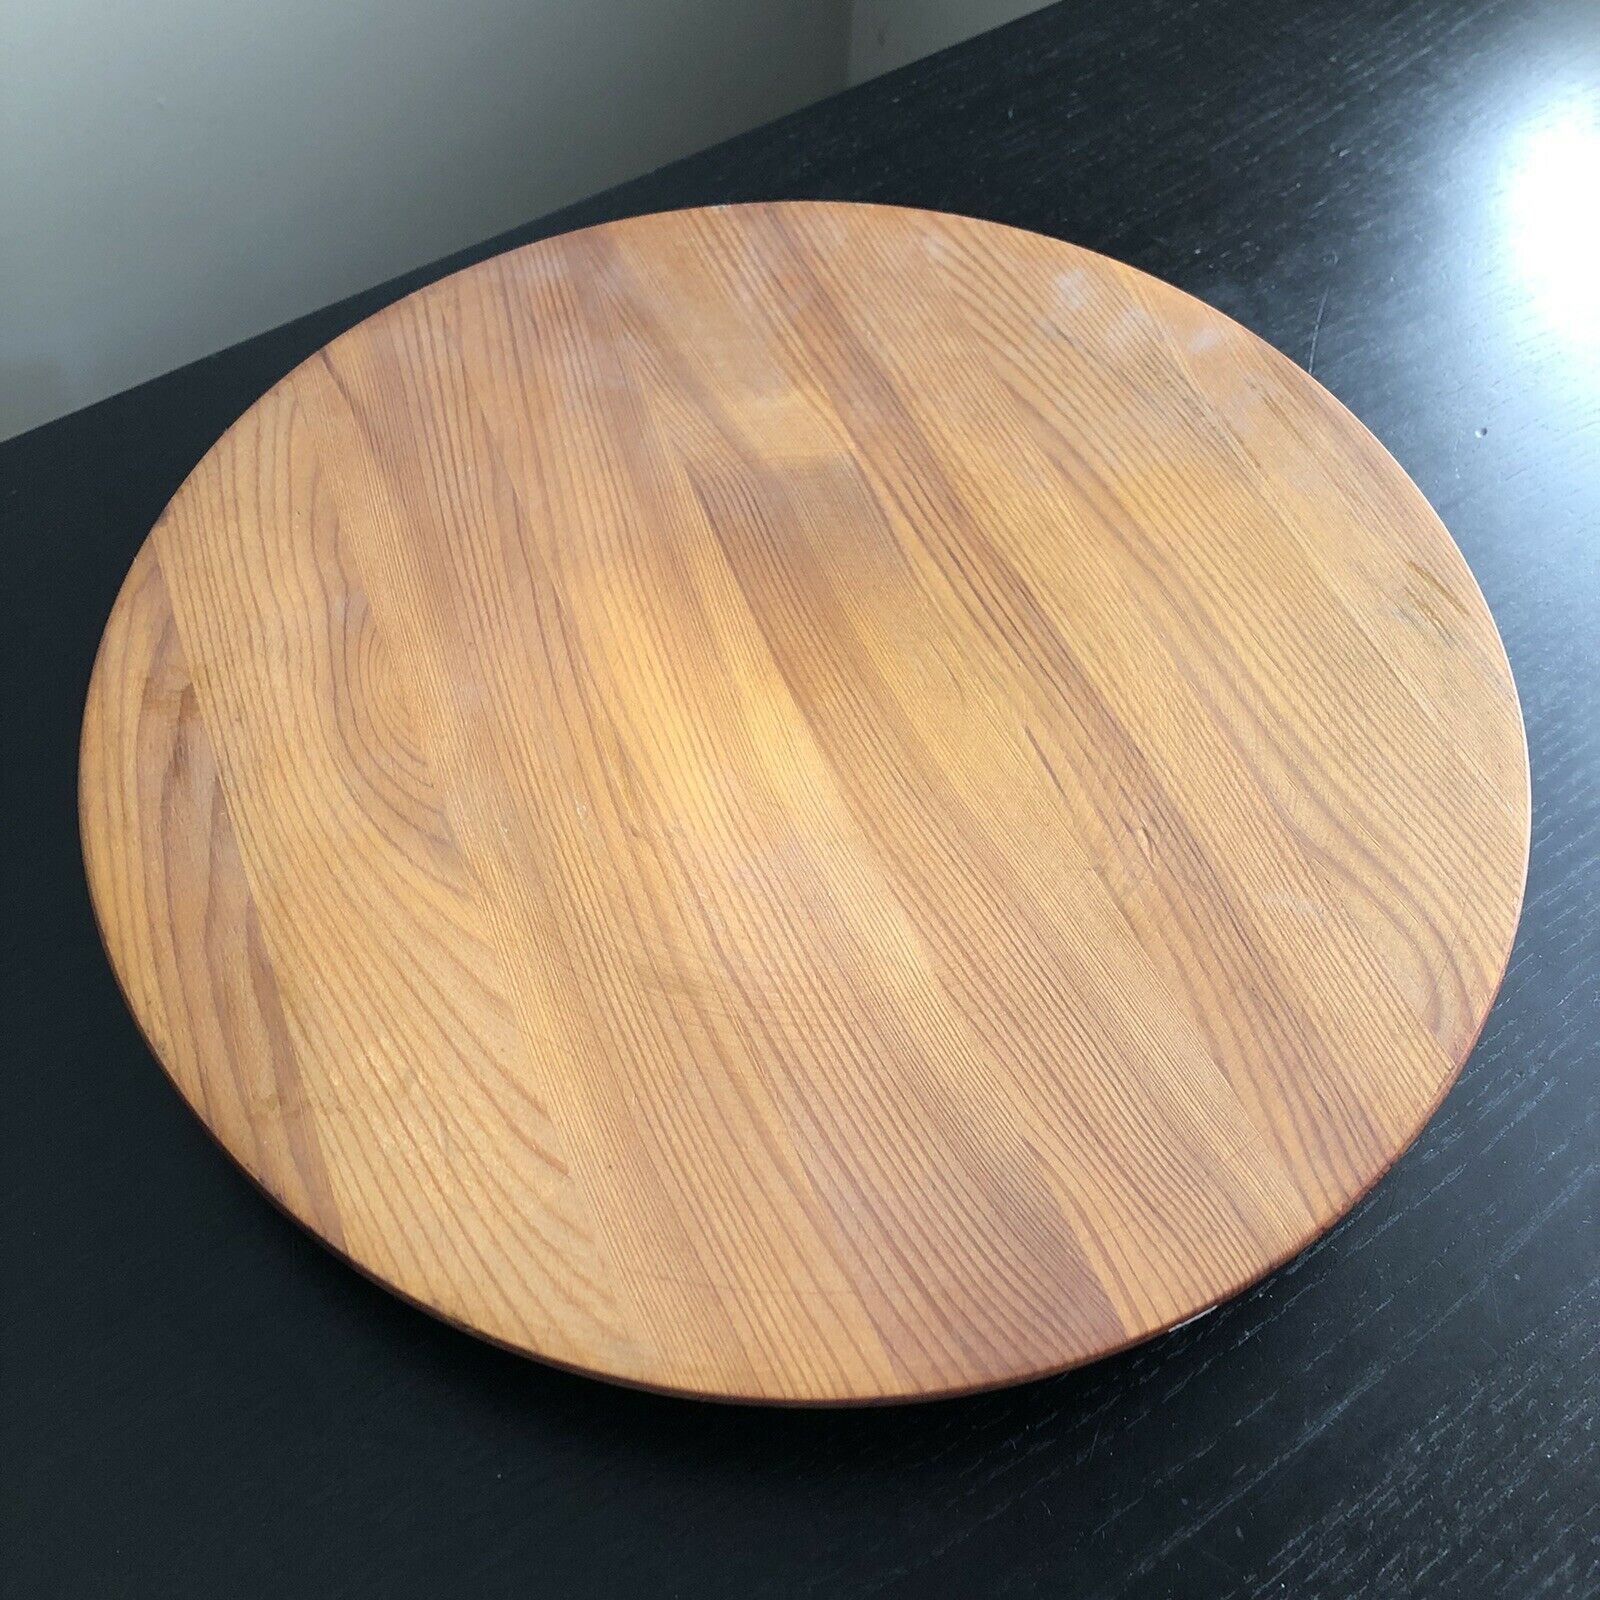 Antique Valuations: Vintage MCM Mid Century Modern Carved Wood Charger Polish SIGNED Plate Art